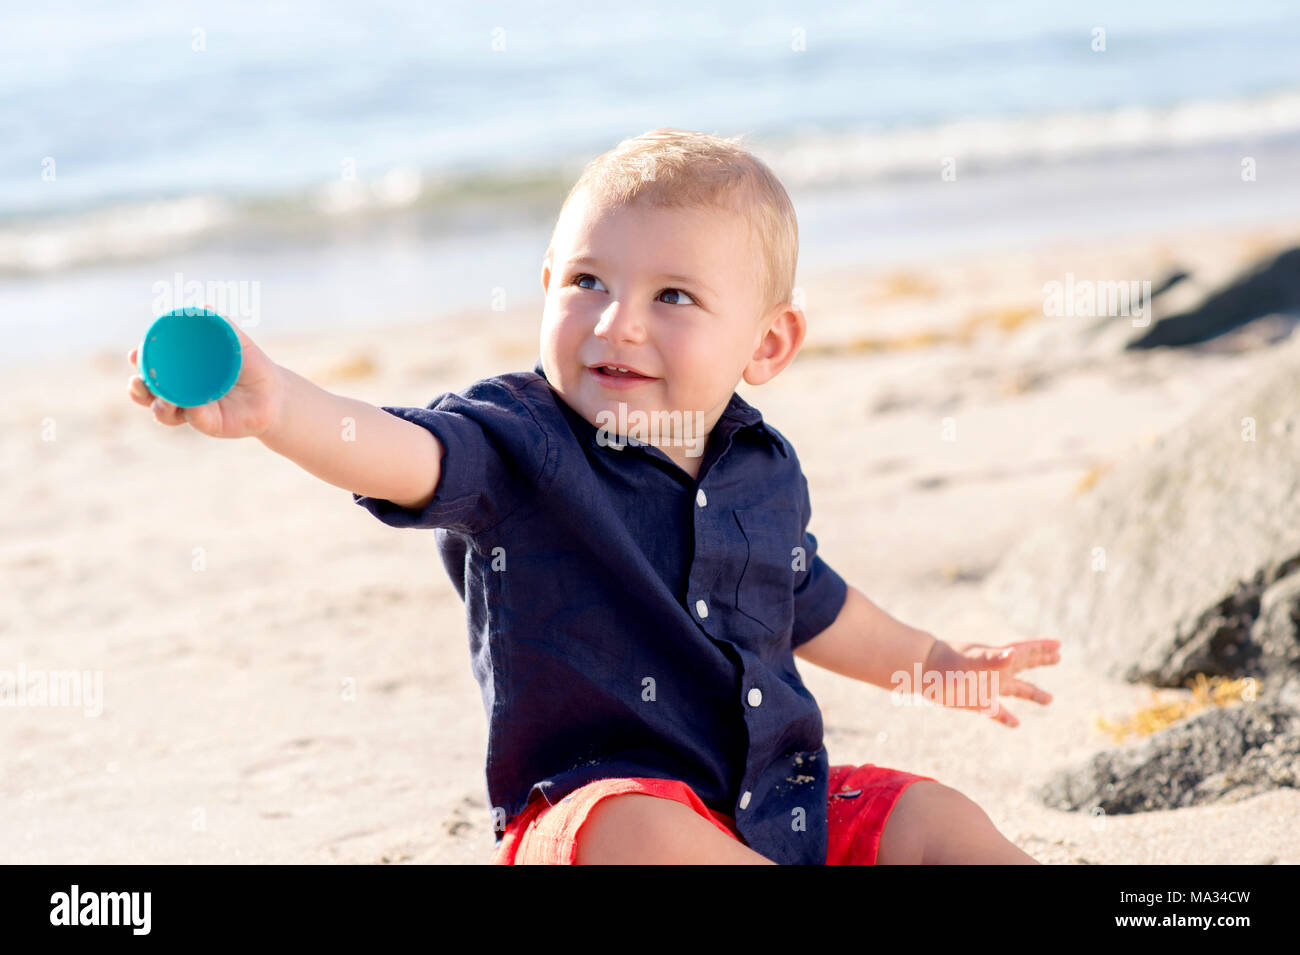 A one year old baby boy sitting on a beach. He is smiling and handing his toy to someone off camera. Stock Photo